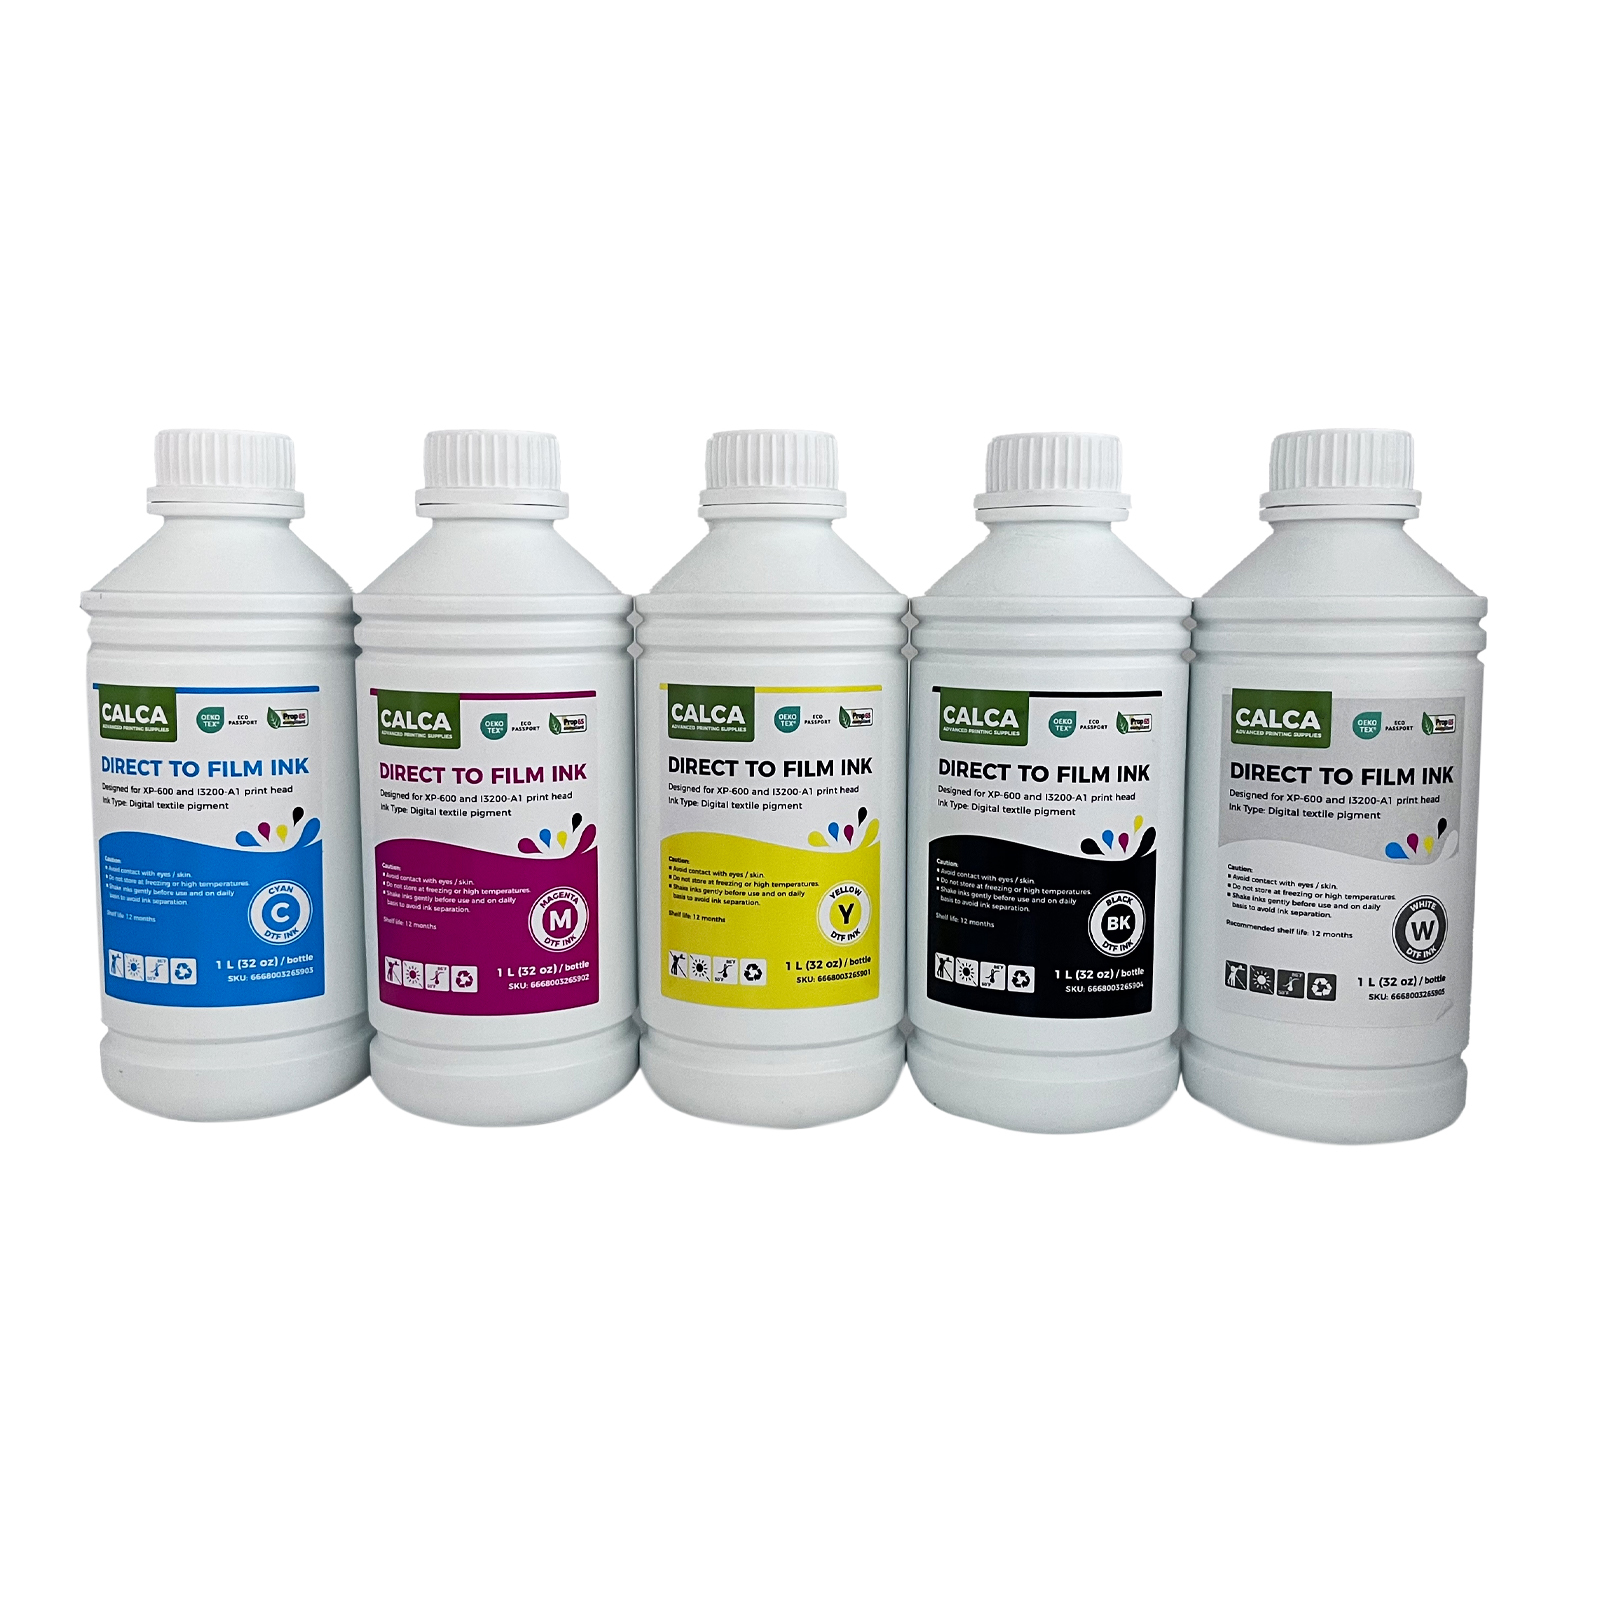 5 Colors(C,M,Y,K,W) CALCA Direct to Transfer Film Ink for Epson Printheads. 32 oz, Bottle of 1L, Water-based DTF Inks